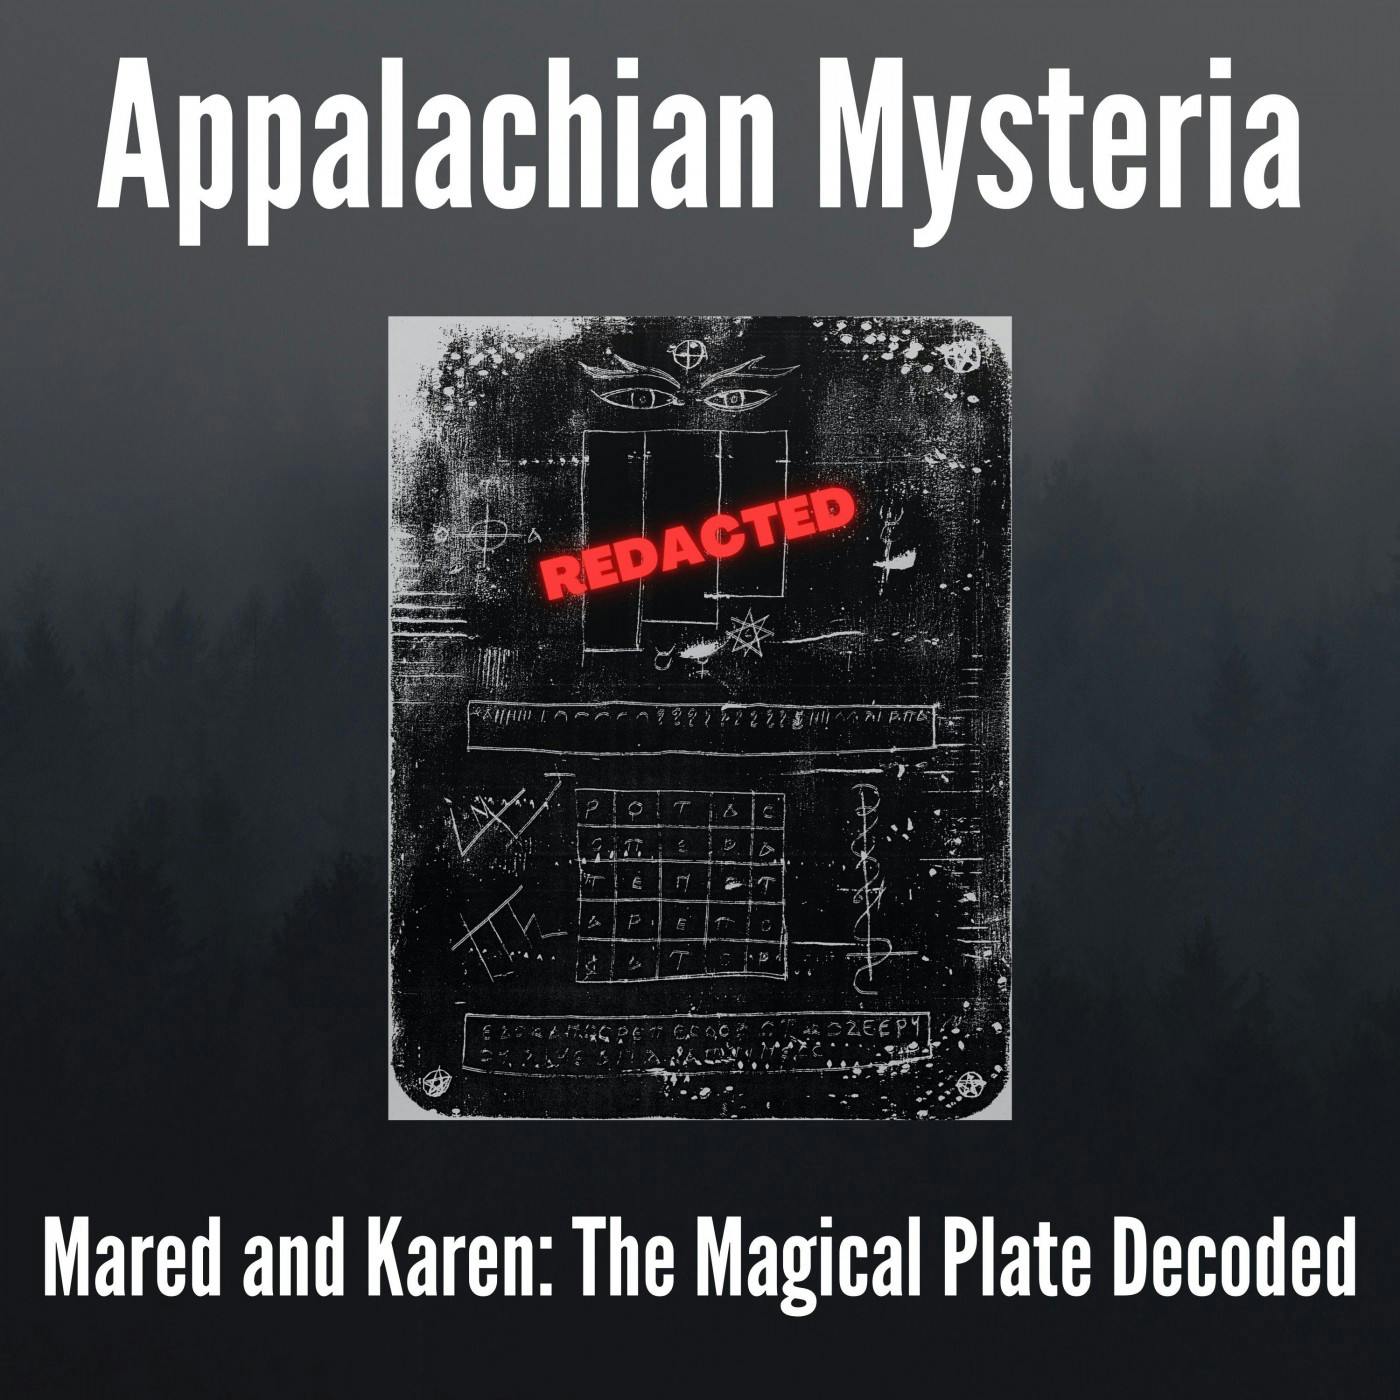 Mared and Karen: The Magical Plate Decoded